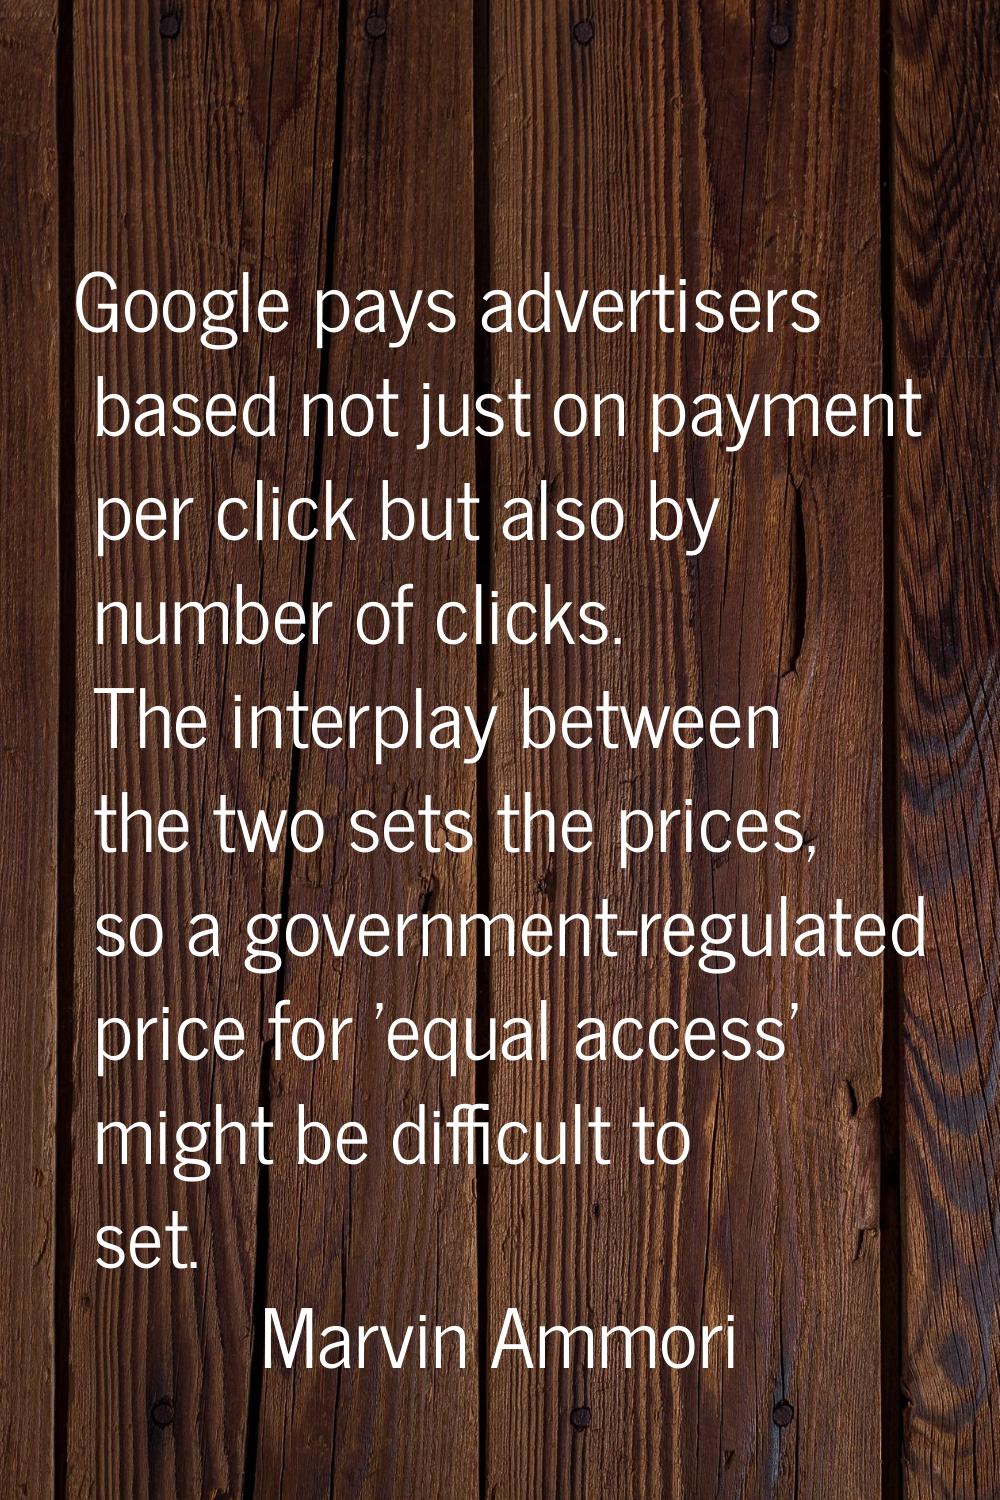 Google pays advertisers based not just on payment per click but also by number of clicks. The inter